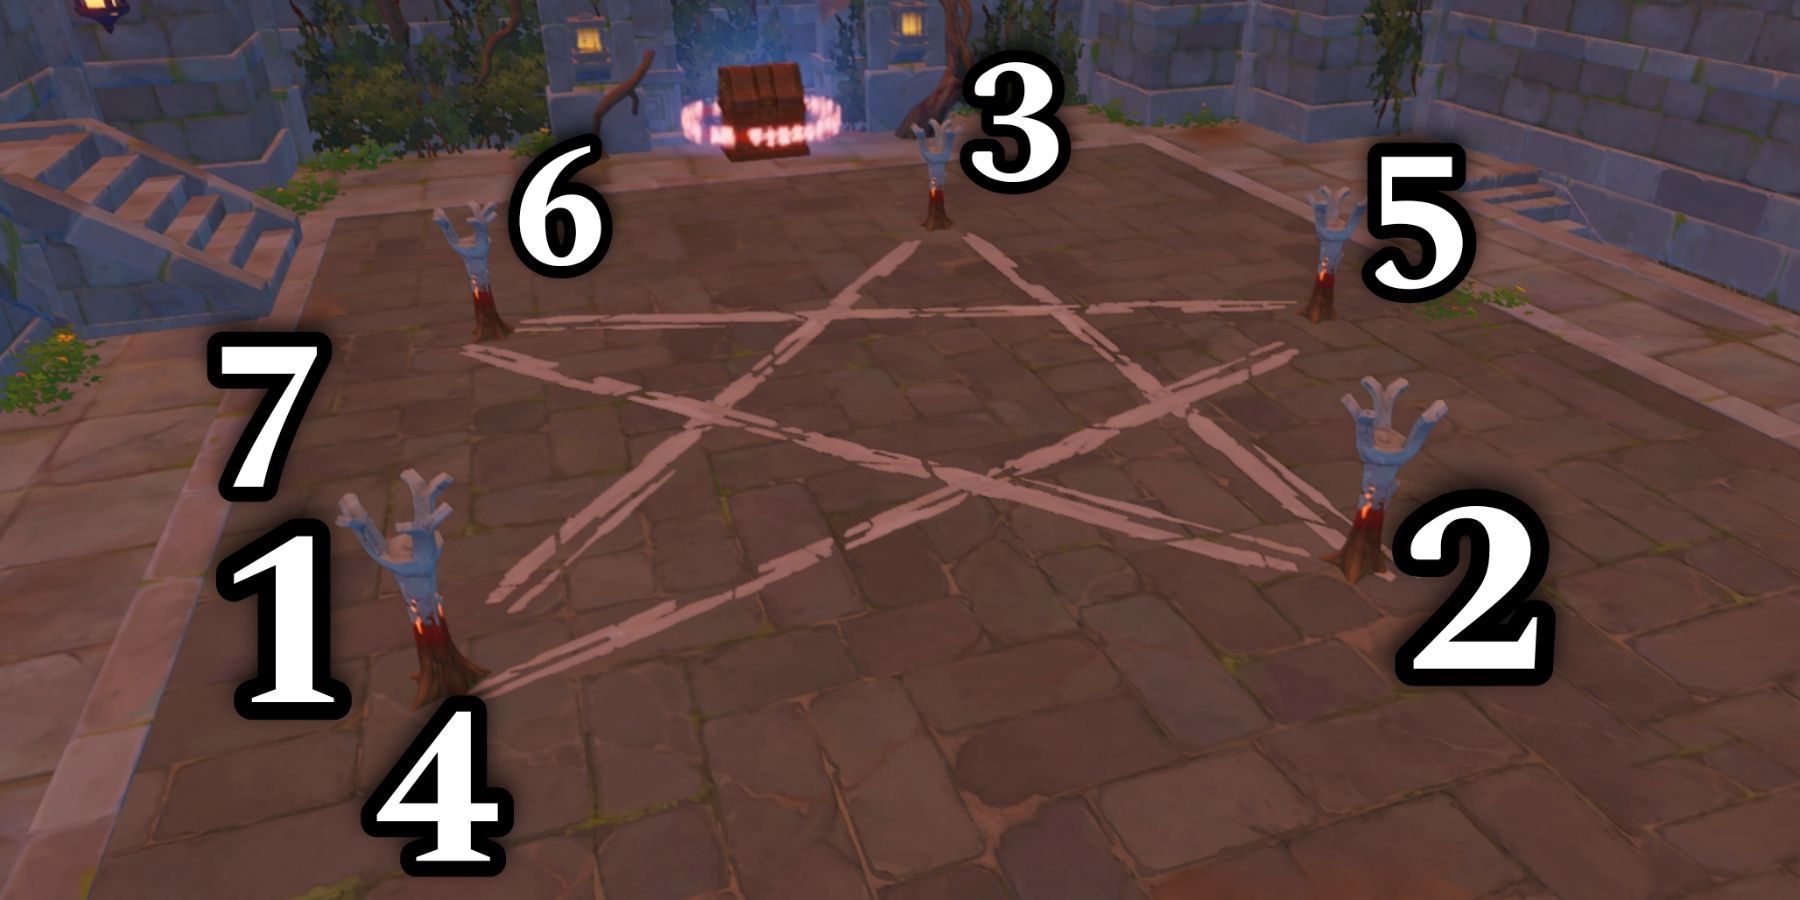 trails in tianqiu Genshin Impact torch puzzle solution